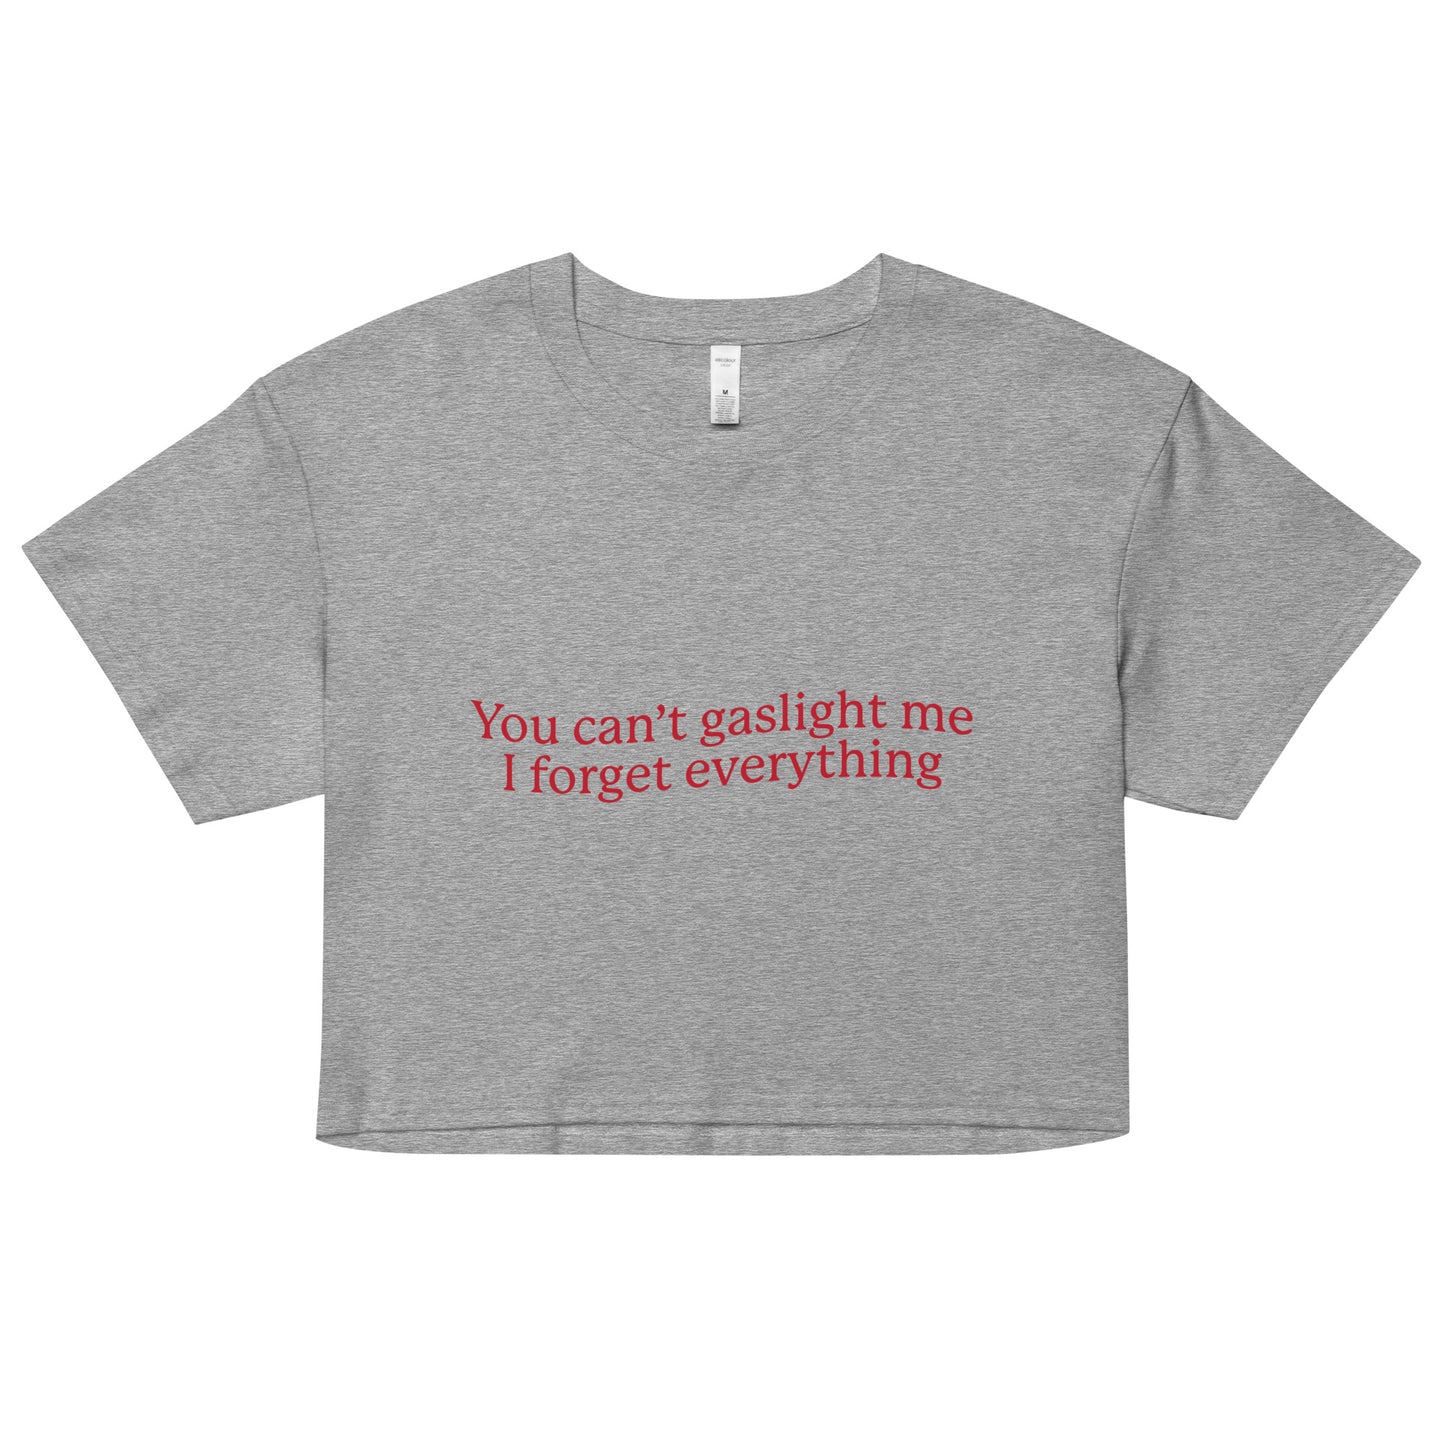 You Can't Gaslight Me I Forget Everything crop top